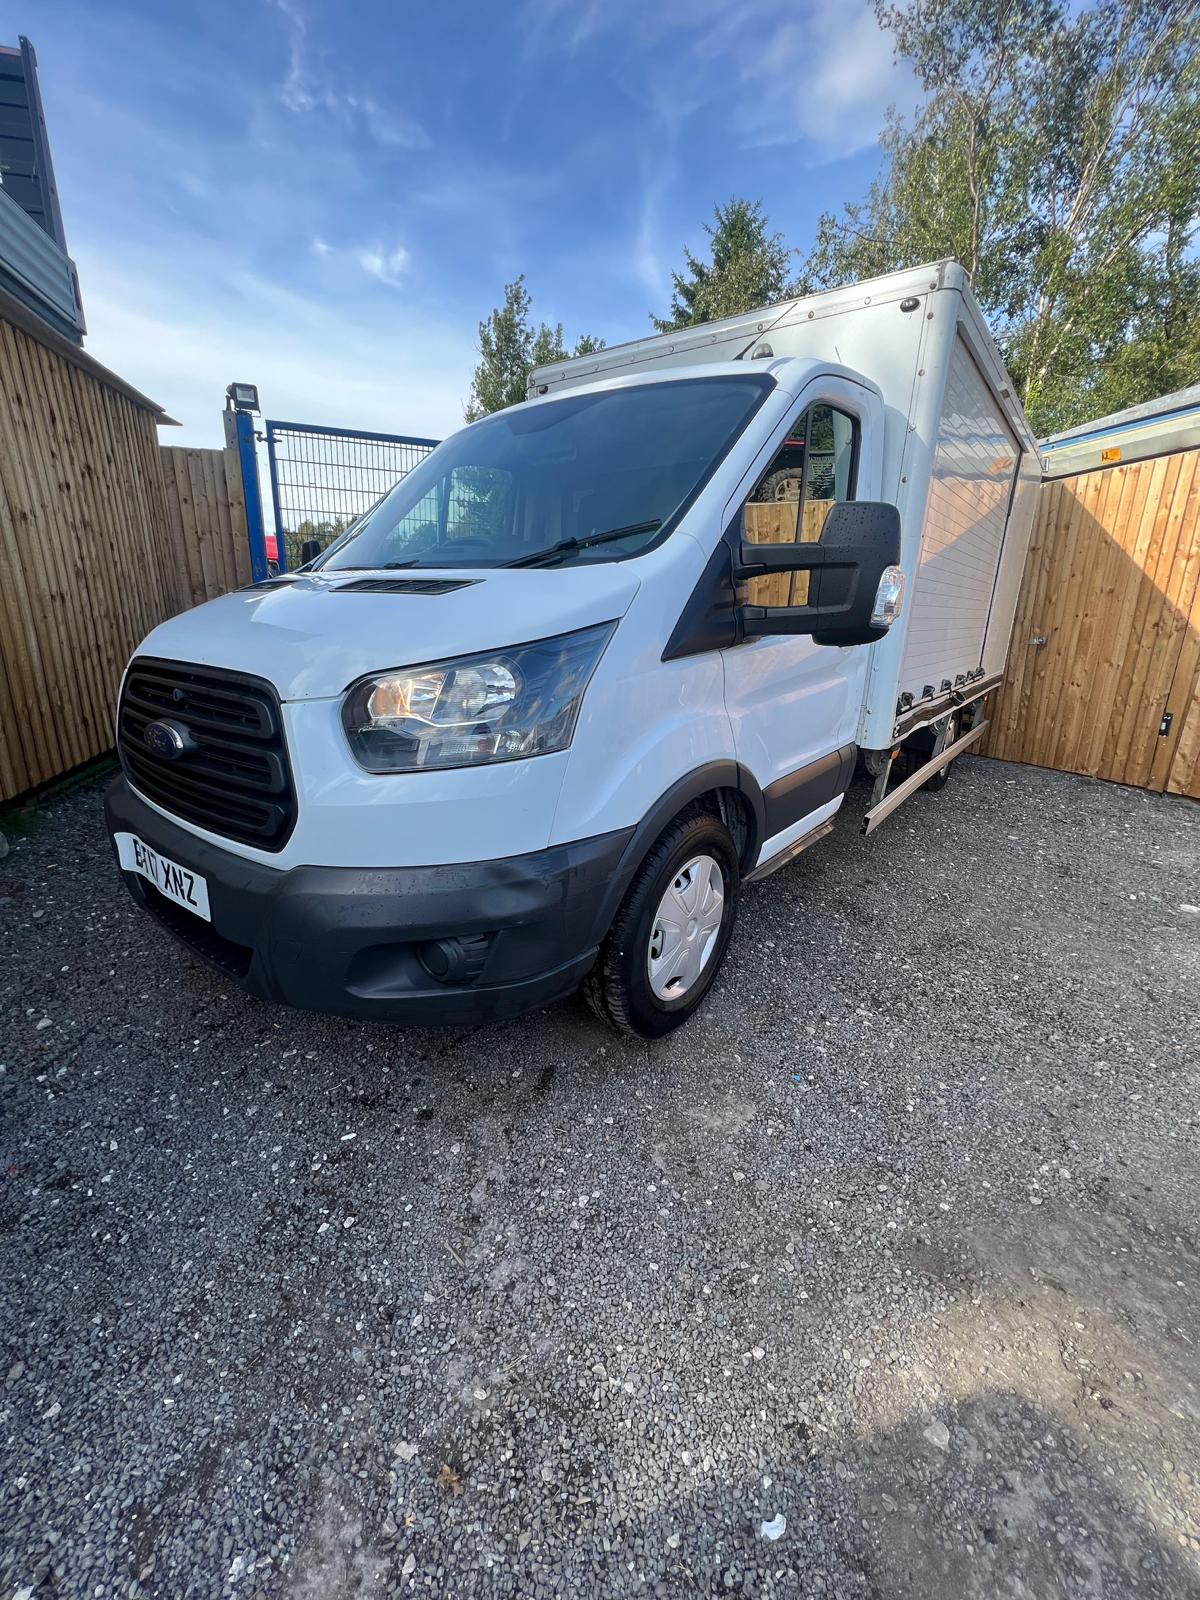 Bid on FORD TRANSIT BOX VAN 2017 LUTON EURO6 LWB 6 SPEED MANUAL 1COMPANY OWNER FROM NEW- Buy &amp; Sell on Auction with EAMA Group